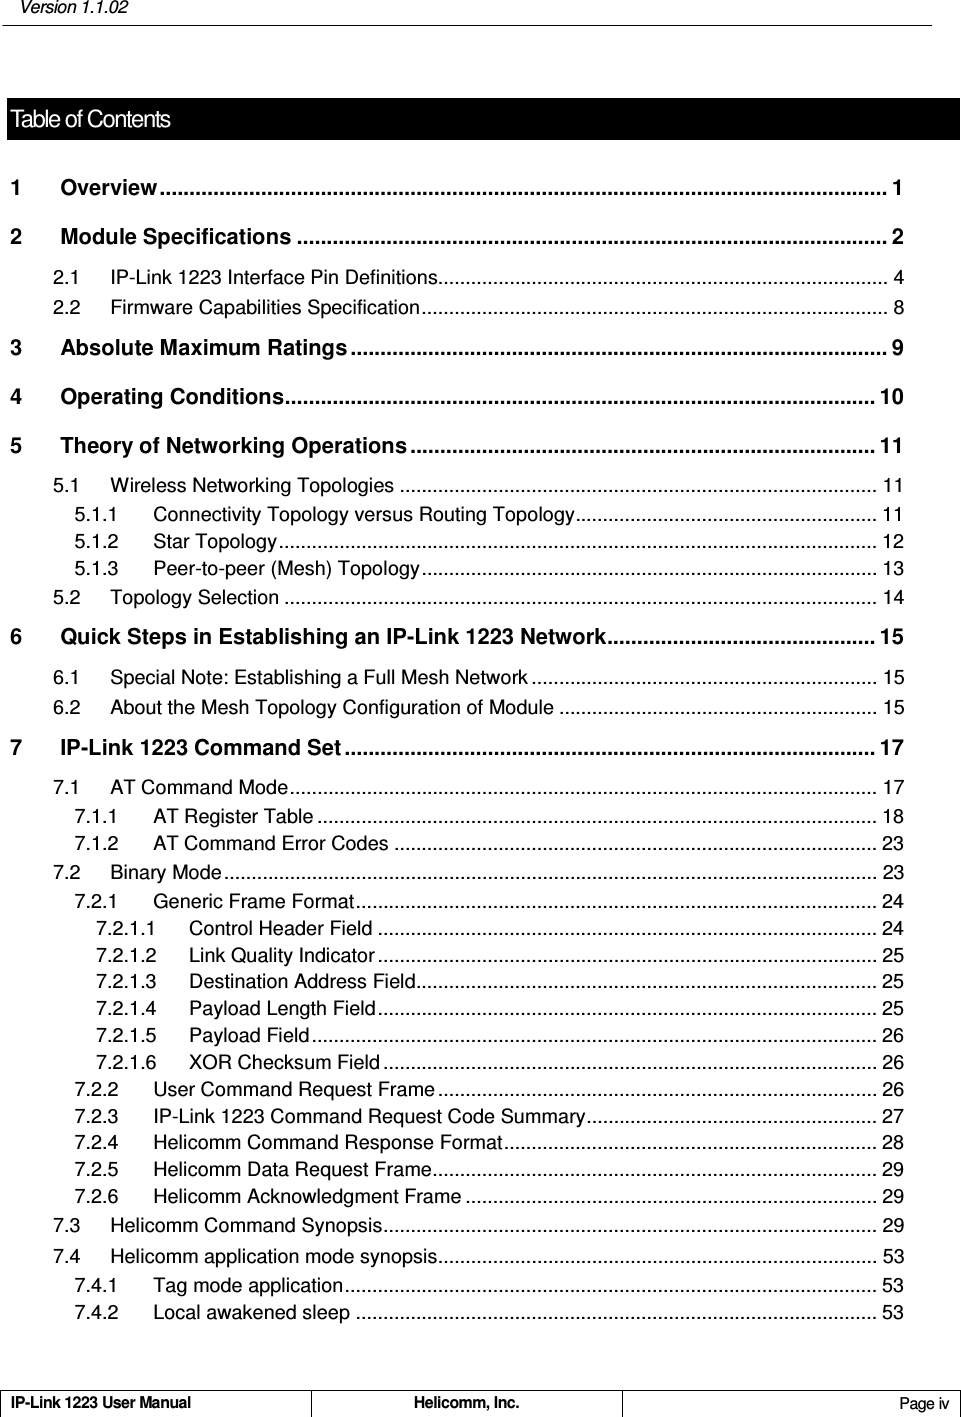   Version 1.1.02 IP-Link 1223 User Manual  Helicomm, Inc.  Page iv   Table of Contents1 Overview.......................................................................................................................... 1 2 Module Specifications ................................................................................................... 2 2.1 IP-Link 1223 Interface Pin Definitions.................................................................................. 4 2.2 Firmware Capabilities Specification..................................................................................... 8 3 Absolute Maximum Ratings .......................................................................................... 9 4 Operating Conditions................................................................................................... 10 5 Theory of Networking Operations .............................................................................. 11 5.1 Wireless Networking Topologies ....................................................................................... 11 5.1.1 Connectivity Topology versus Routing Topology....................................................... 11 5.1.2 Star Topology............................................................................................................. 12 5.1.3 Peer-to-peer (Mesh) Topology................................................................................... 13 5.2 Topology Selection ............................................................................................................ 14 6 Quick Steps in Establishing an IP-Link 1223 Network............................................. 15 6.1 Special Note: Establishing a Full Mesh Network ............................................................... 15 6.2 About the Mesh Topology Configuration of Module .......................................................... 15 7 IP-Link 1223 Command Set ......................................................................................... 17 7.1 AT Command Mode........................................................................................................... 17 7.1.1 AT Register Table ...................................................................................................... 18 7.1.2 AT Command Error Codes ........................................................................................ 23 7.2 Binary Mode....................................................................................................................... 23 7.2.1 Generic Frame Format............................................................................................... 24 7.2.1.1 Control Header Field ........................................................................................... 24 7.2.1.2 Link Quality Indicator ........................................................................................... 25 7.2.1.3 Destination Address Field.................................................................................... 25 7.2.1.4 Payload Length Field........................................................................................... 25 7.2.1.5 Payload Field....................................................................................................... 26 7.2.1.6 XOR Checksum Field .......................................................................................... 26 7.2.2 User Command Request Frame ................................................................................ 26 7.2.3 IP-Link 1223 Command Request Code Summary..................................................... 27 7.2.4 Helicomm Command Response Format.................................................................... 28 7.2.5 Helicomm Data Request Frame................................................................................. 29 7.2.6 Helicomm Acknowledgment Frame ........................................................................... 29 7.3 Helicomm Command Synopsis.......................................................................................... 29 7.4 Helicomm application mode synopsis................................................................................ 53 7.4.1 Tag mode application................................................................................................. 53 7.4.2 Local awakened sleep ............................................................................................... 53 